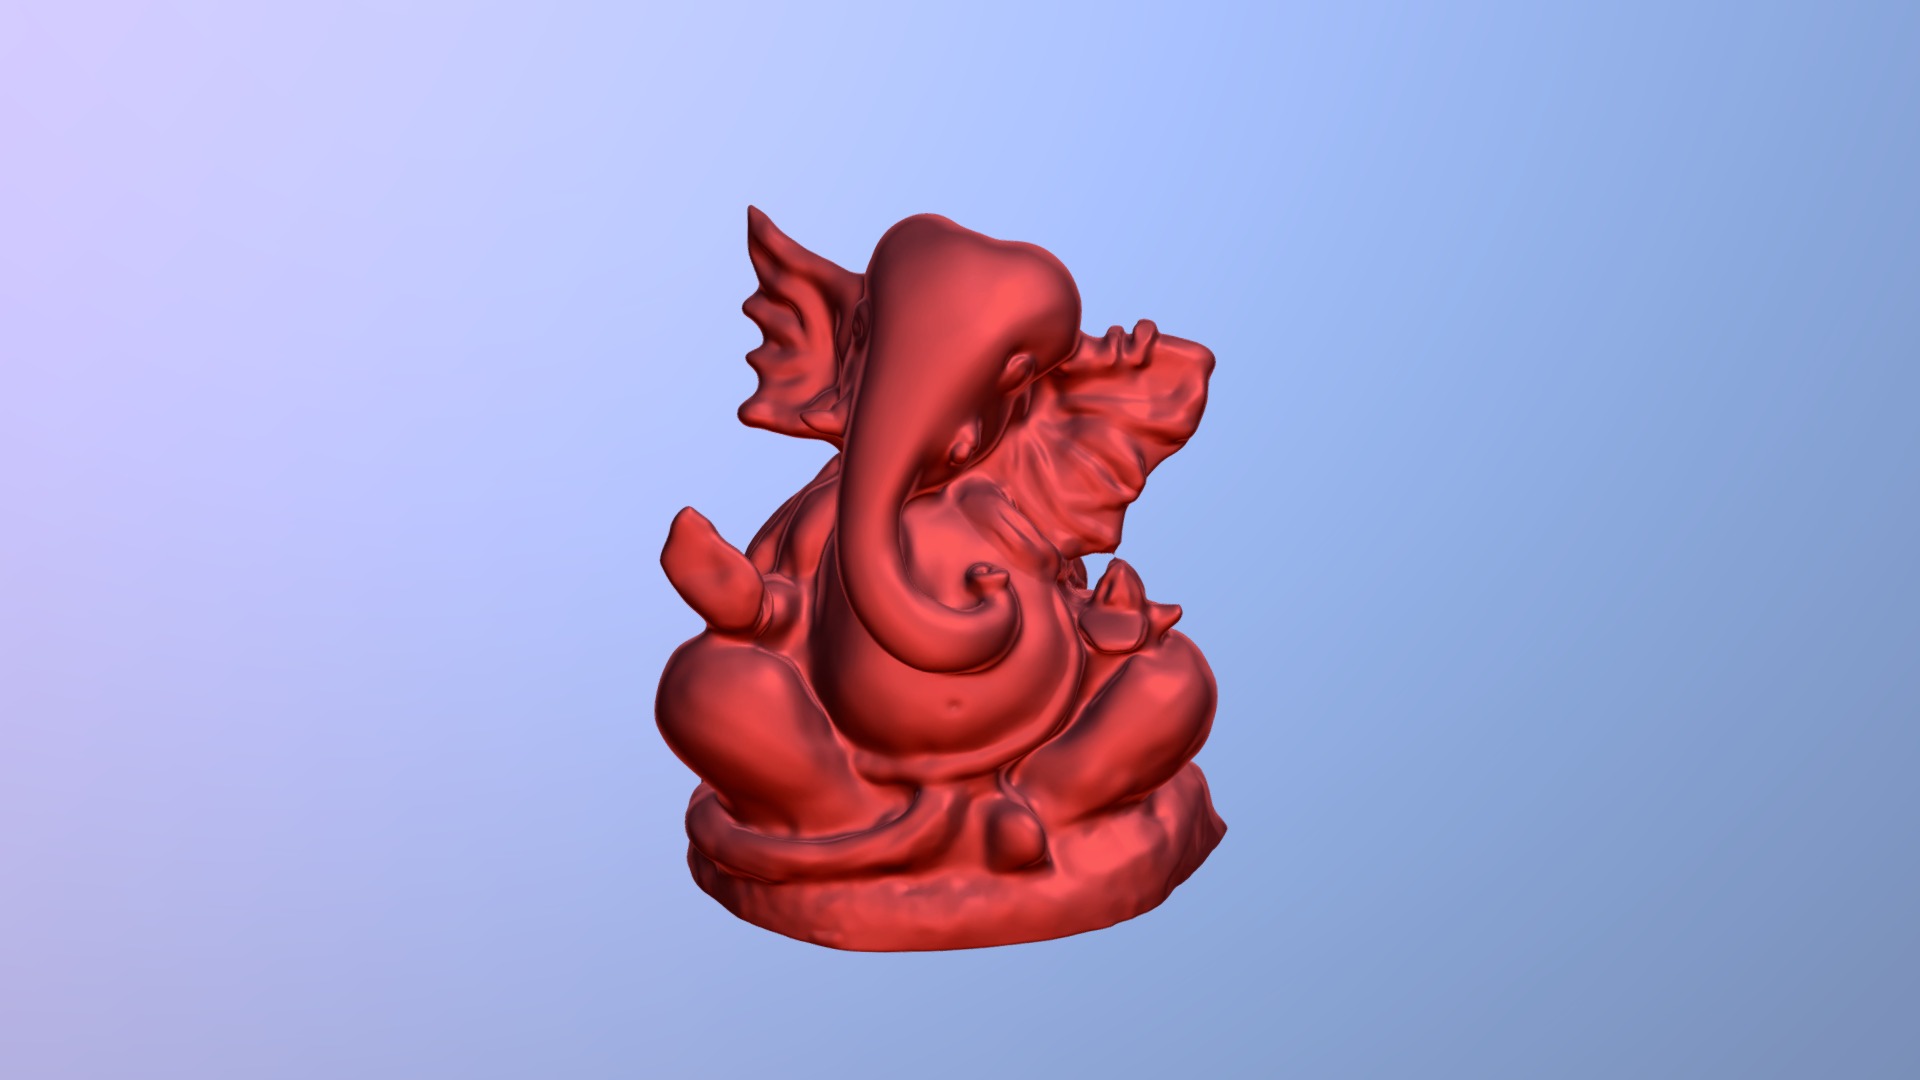 3D model Lord Ganesha - This is a 3D model of the Lord Ganesha. The 3D model is about a red clay sculpture.